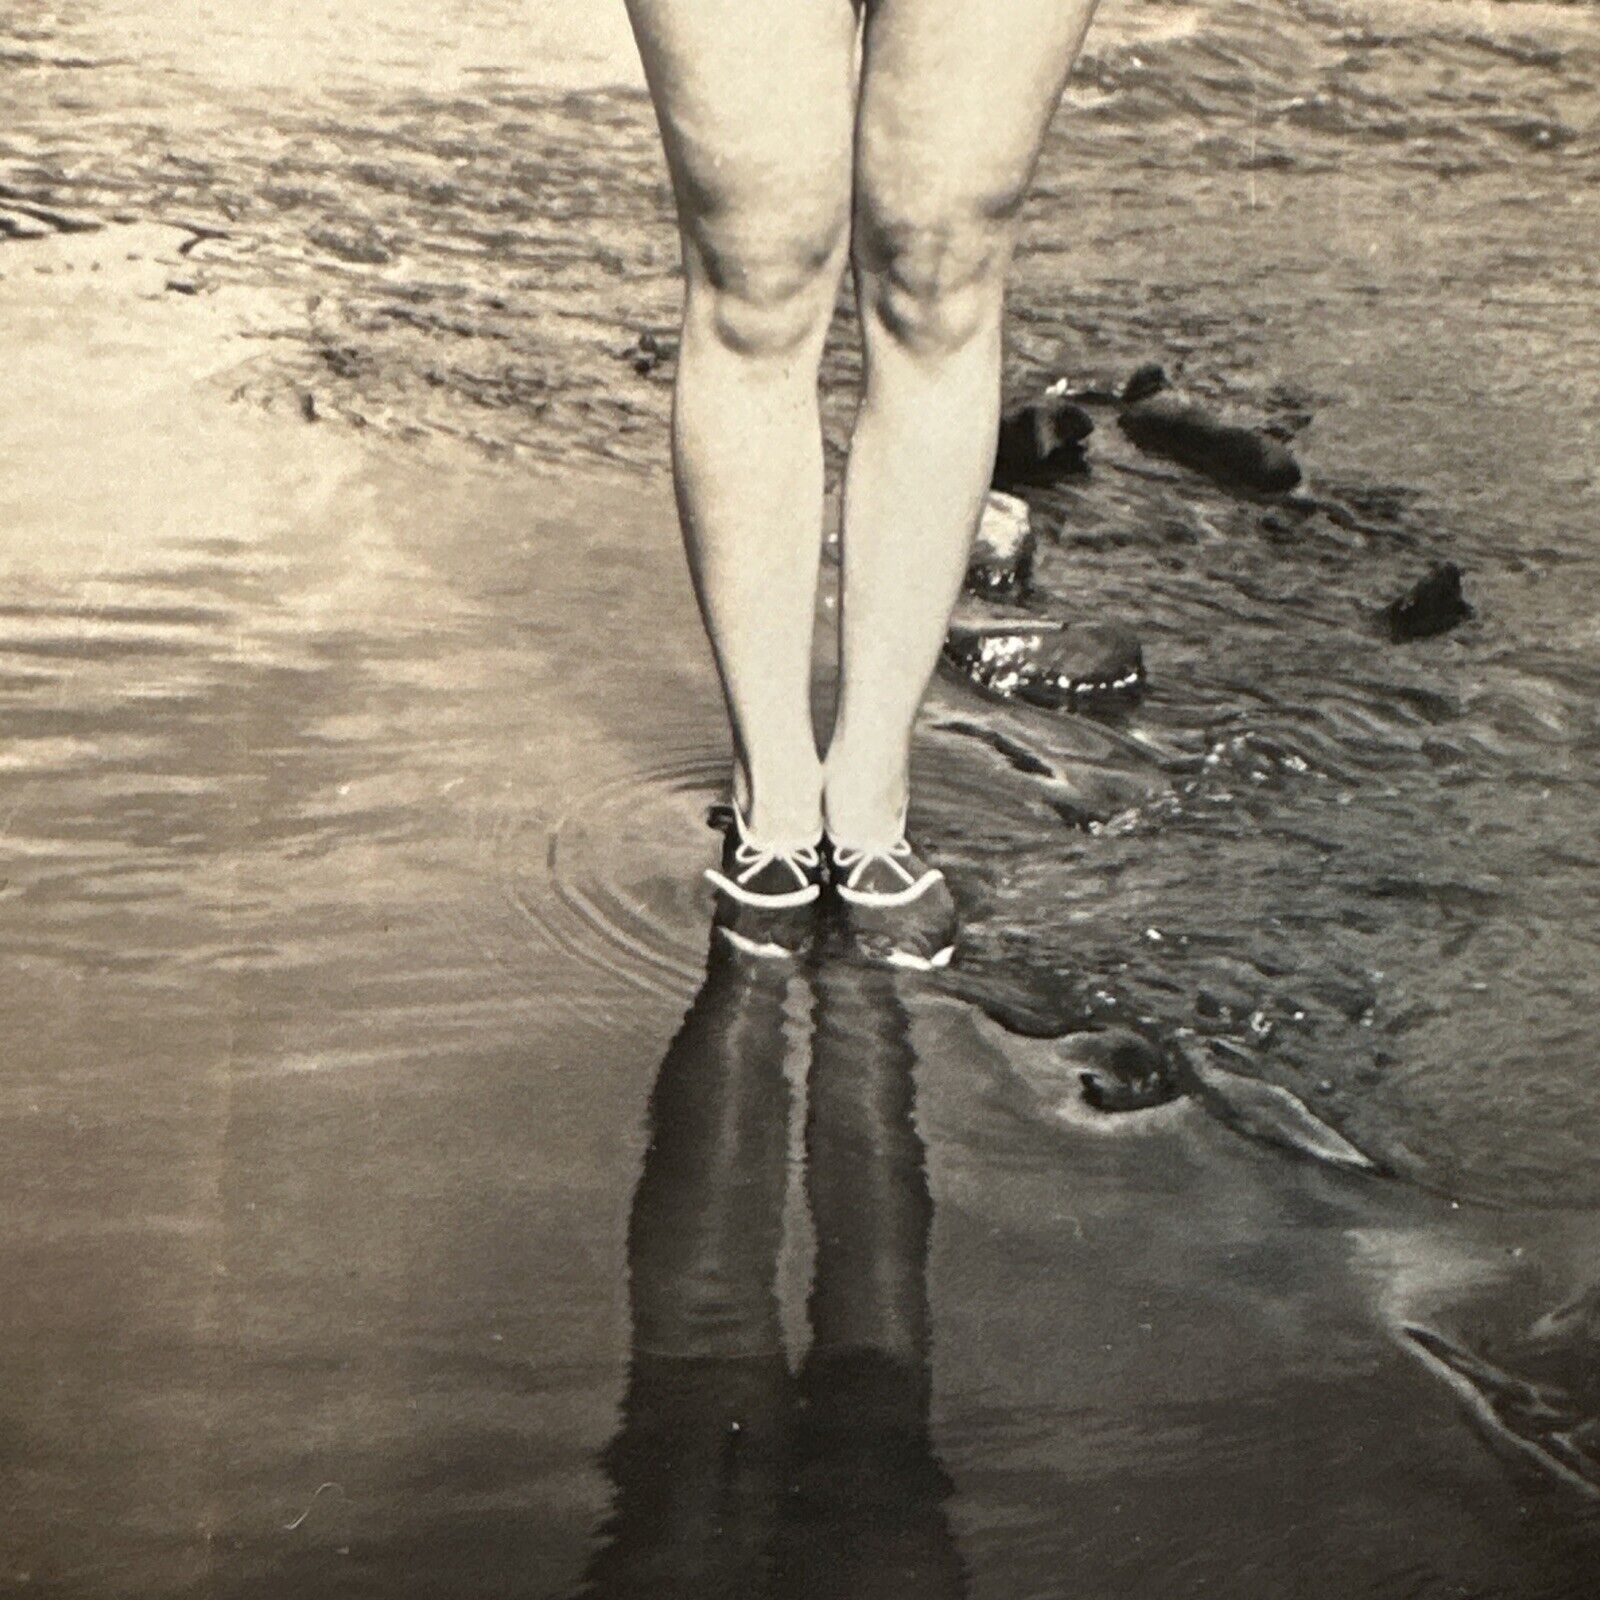 VINTAGE PHOTO 1940s beautiful woman standing in reflective Puddle Reflection Leg